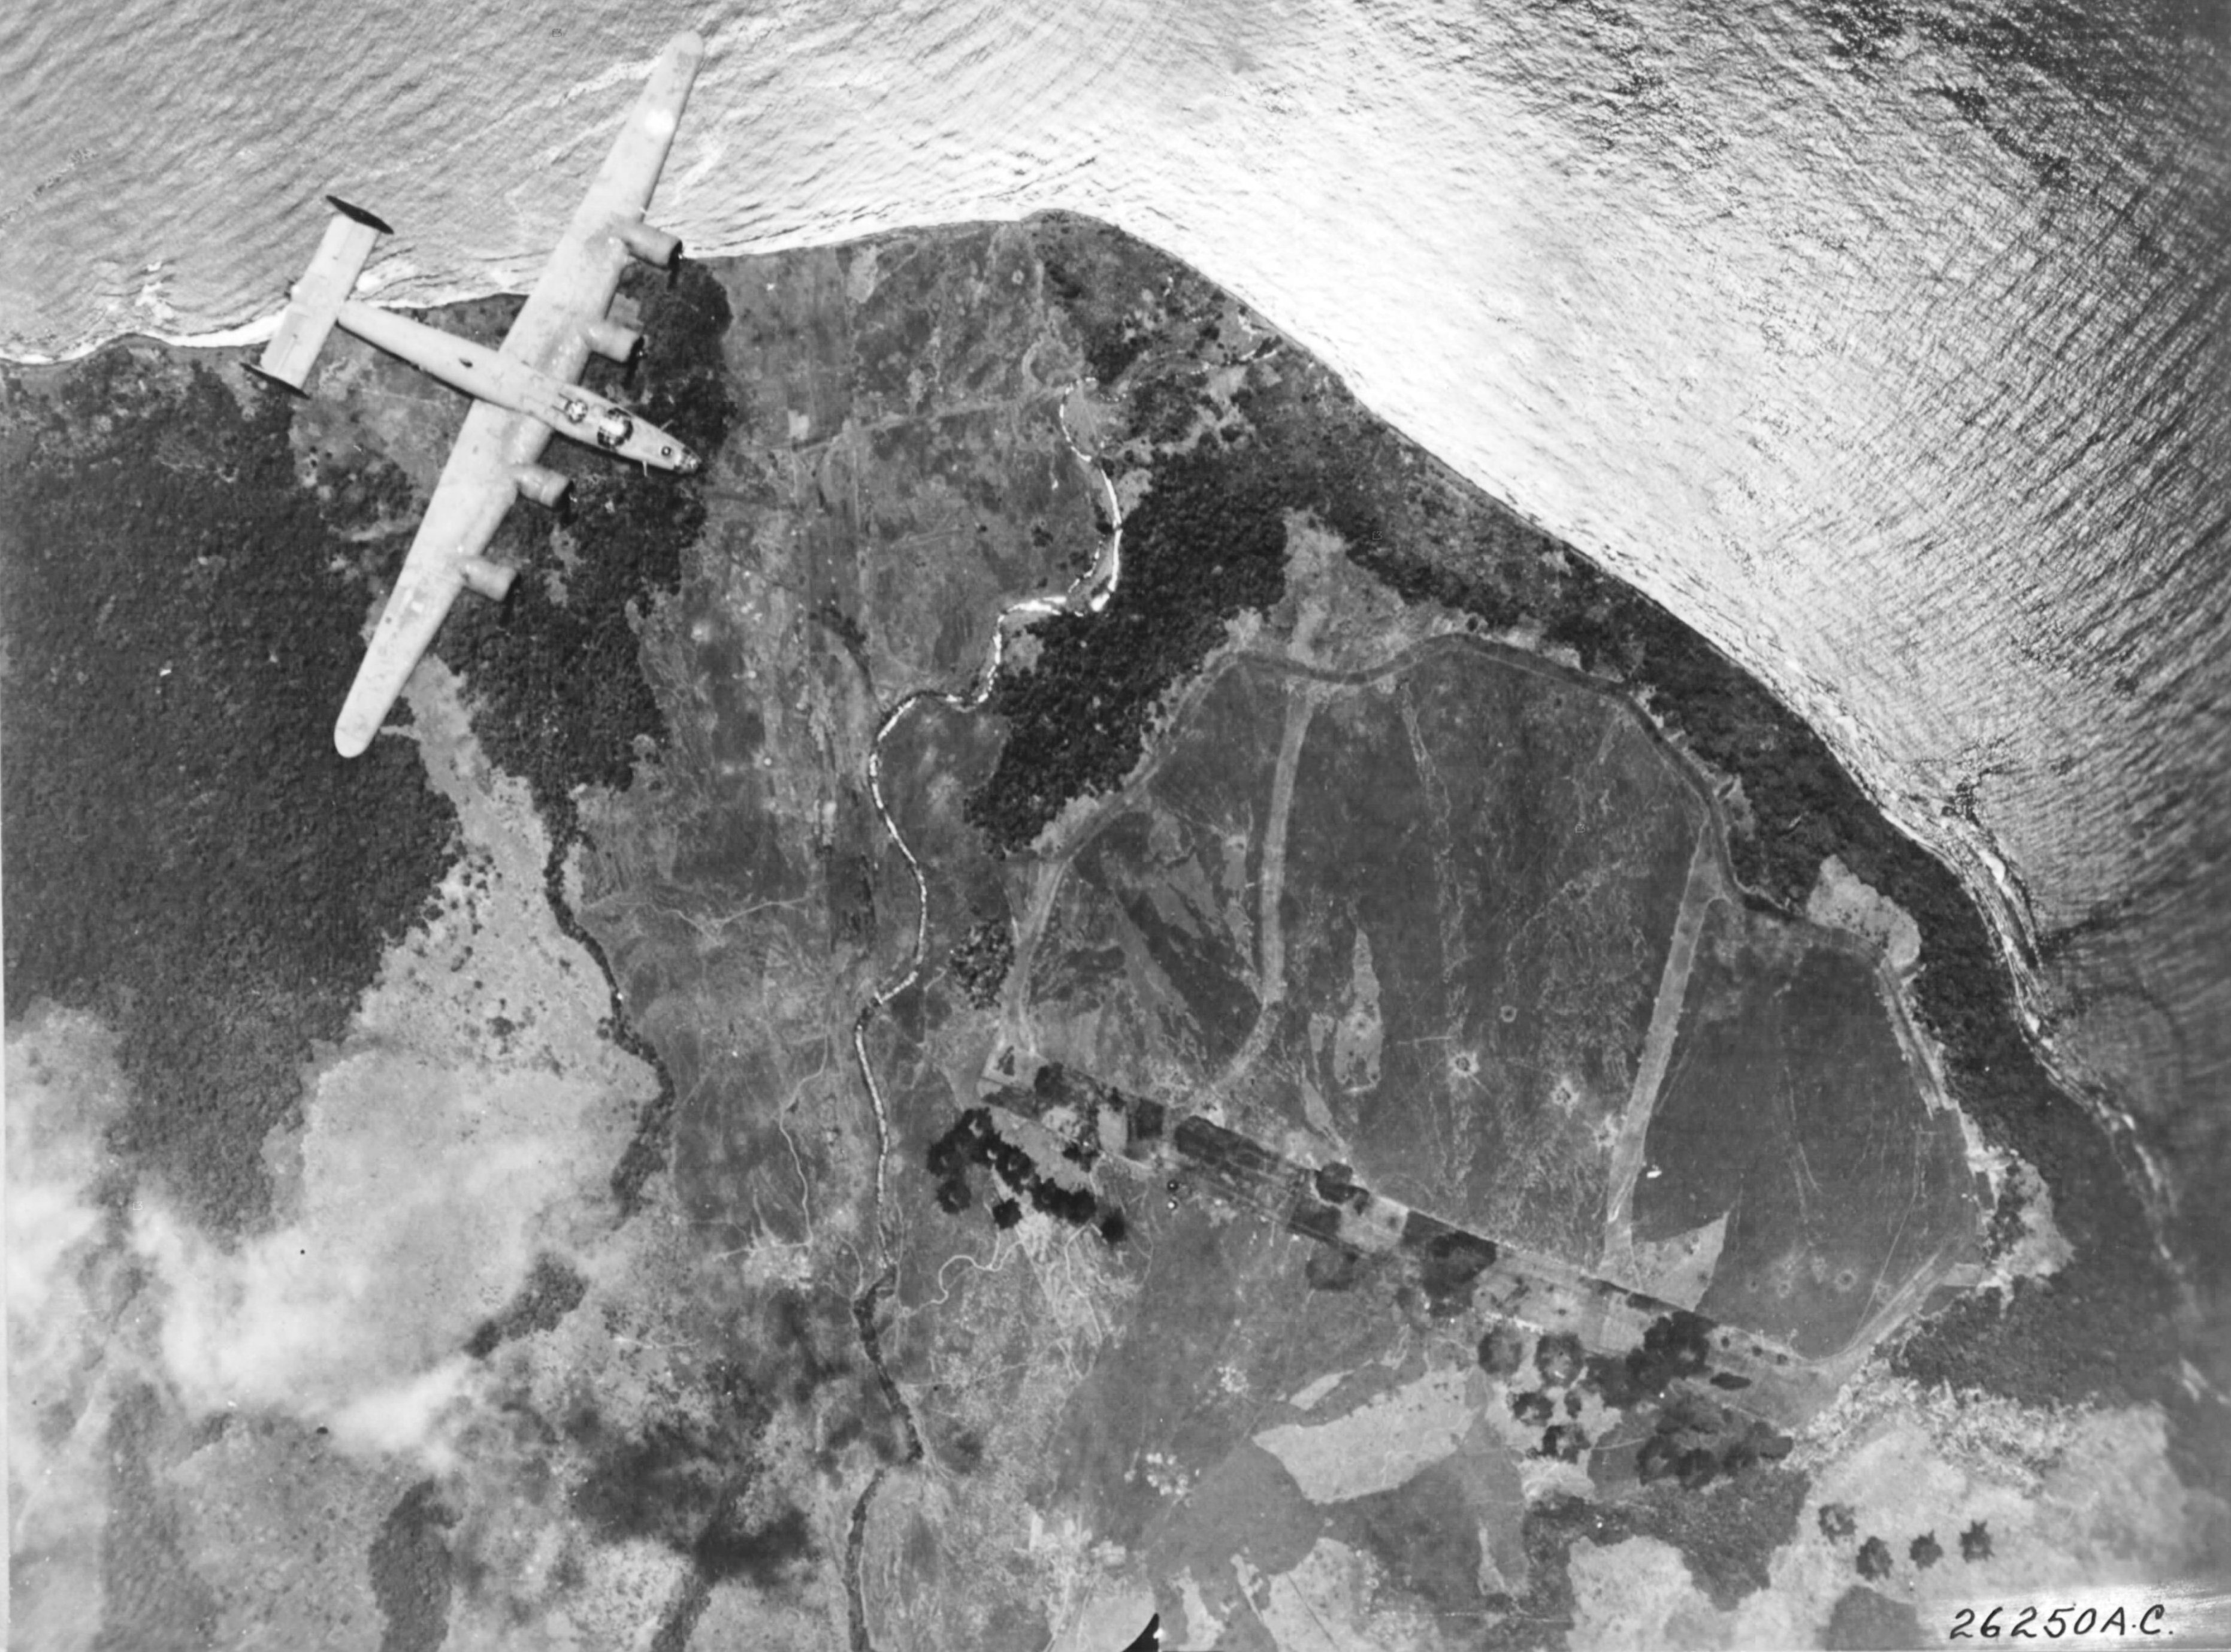 B-24 Liberator bomber raiding the Japanese airfields at Cape Gloucester, New Britain in preparation of the American invasion, Oct 1943